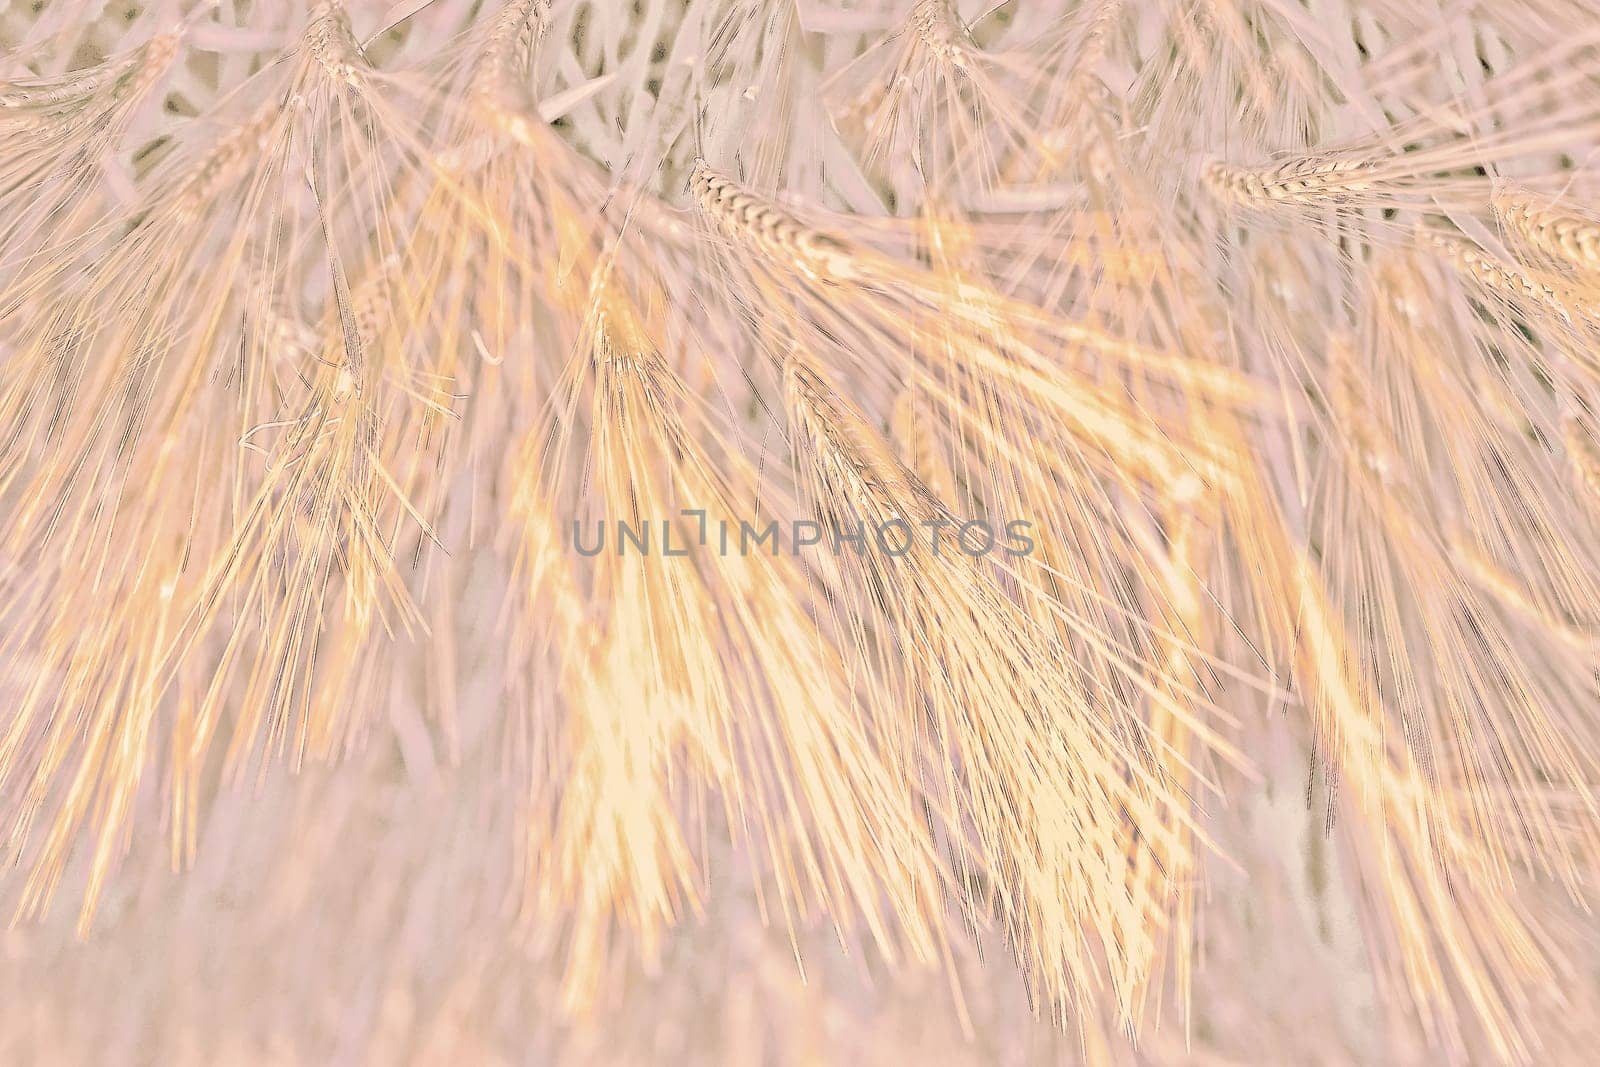 Abstract background with ears of wheat, vibrating shades, painted in the fashionable Pantone color Peach Fuzz 2024